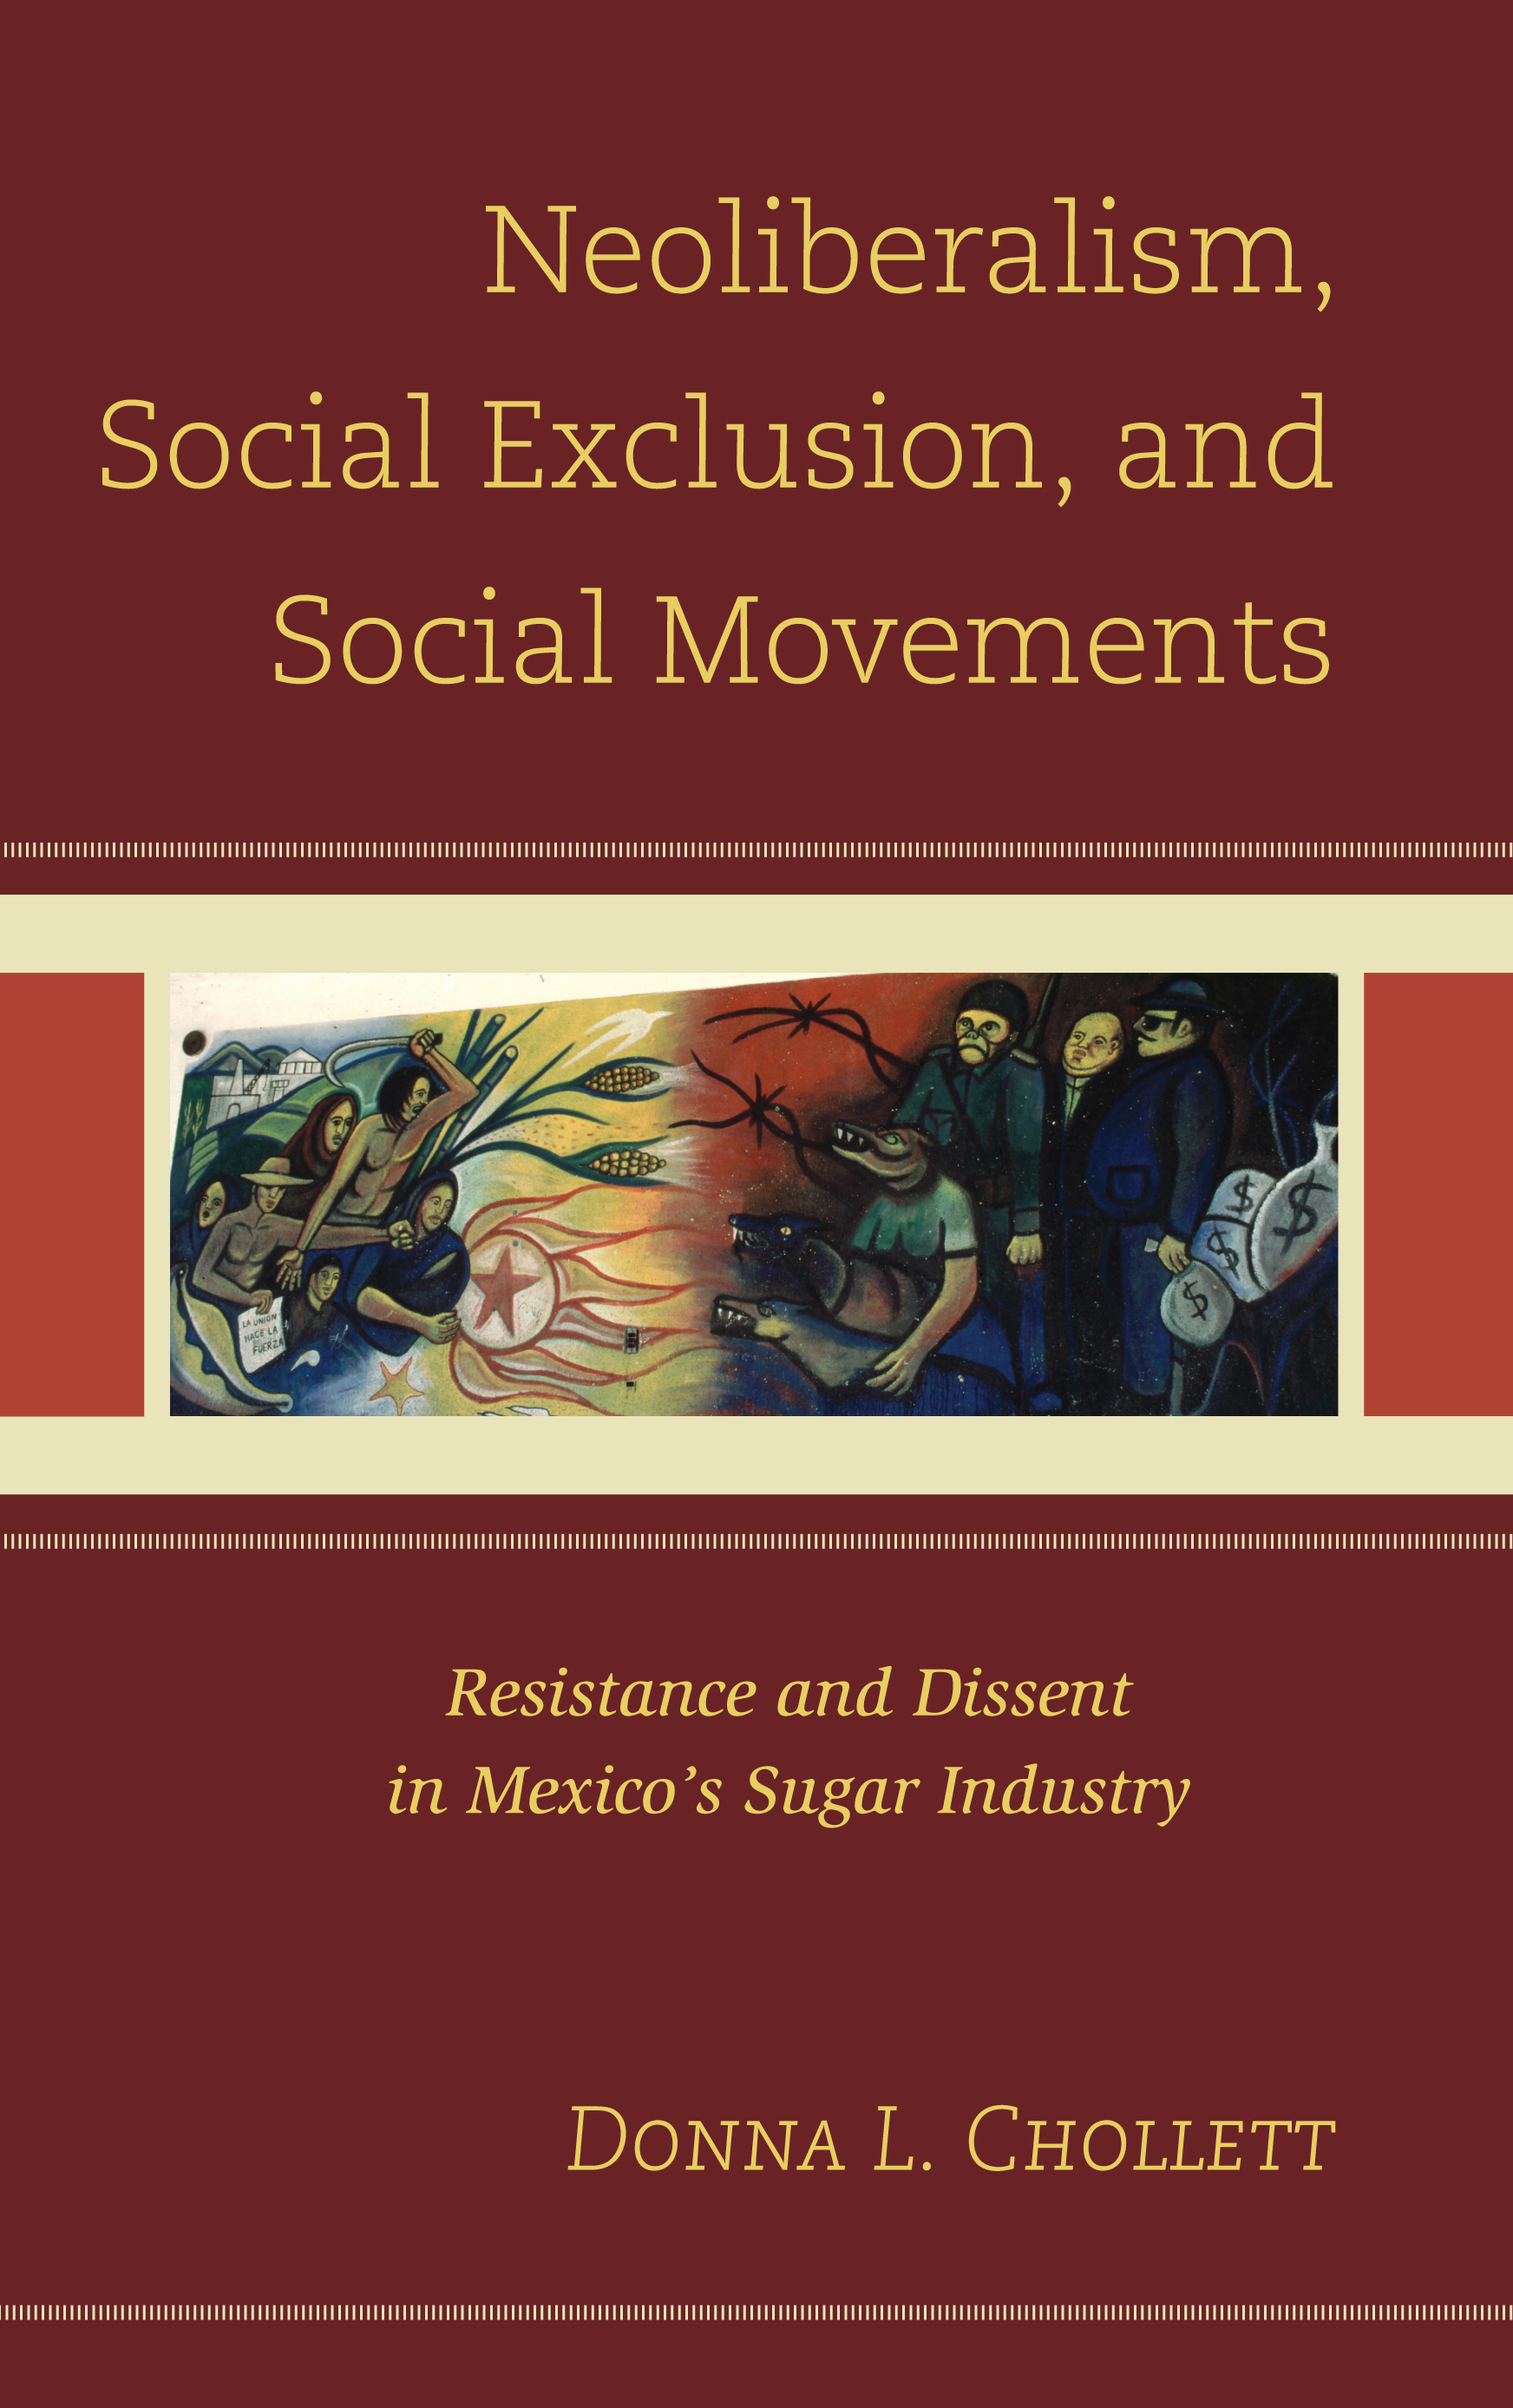 Neoliberalism, Social Exclusion, and Social Movements: Resistance and Dissent in Mexico's Sugar Industry